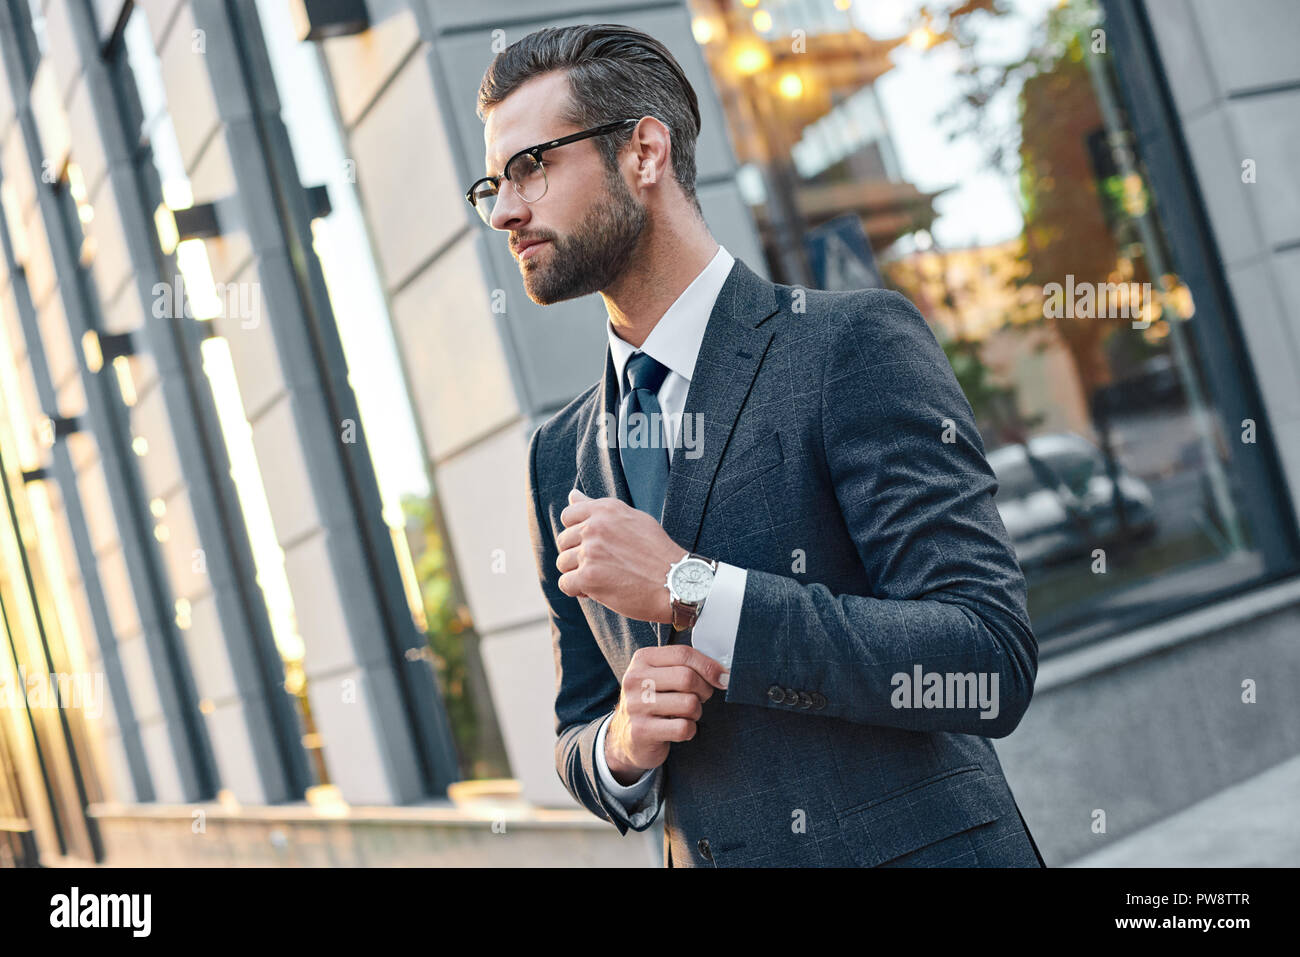 Close up profile portrait of a successful young bearded guy in suit and glasses. So stylish and nerdy. Outdoors on a sunny street, fixing his cuffs Stock Photo